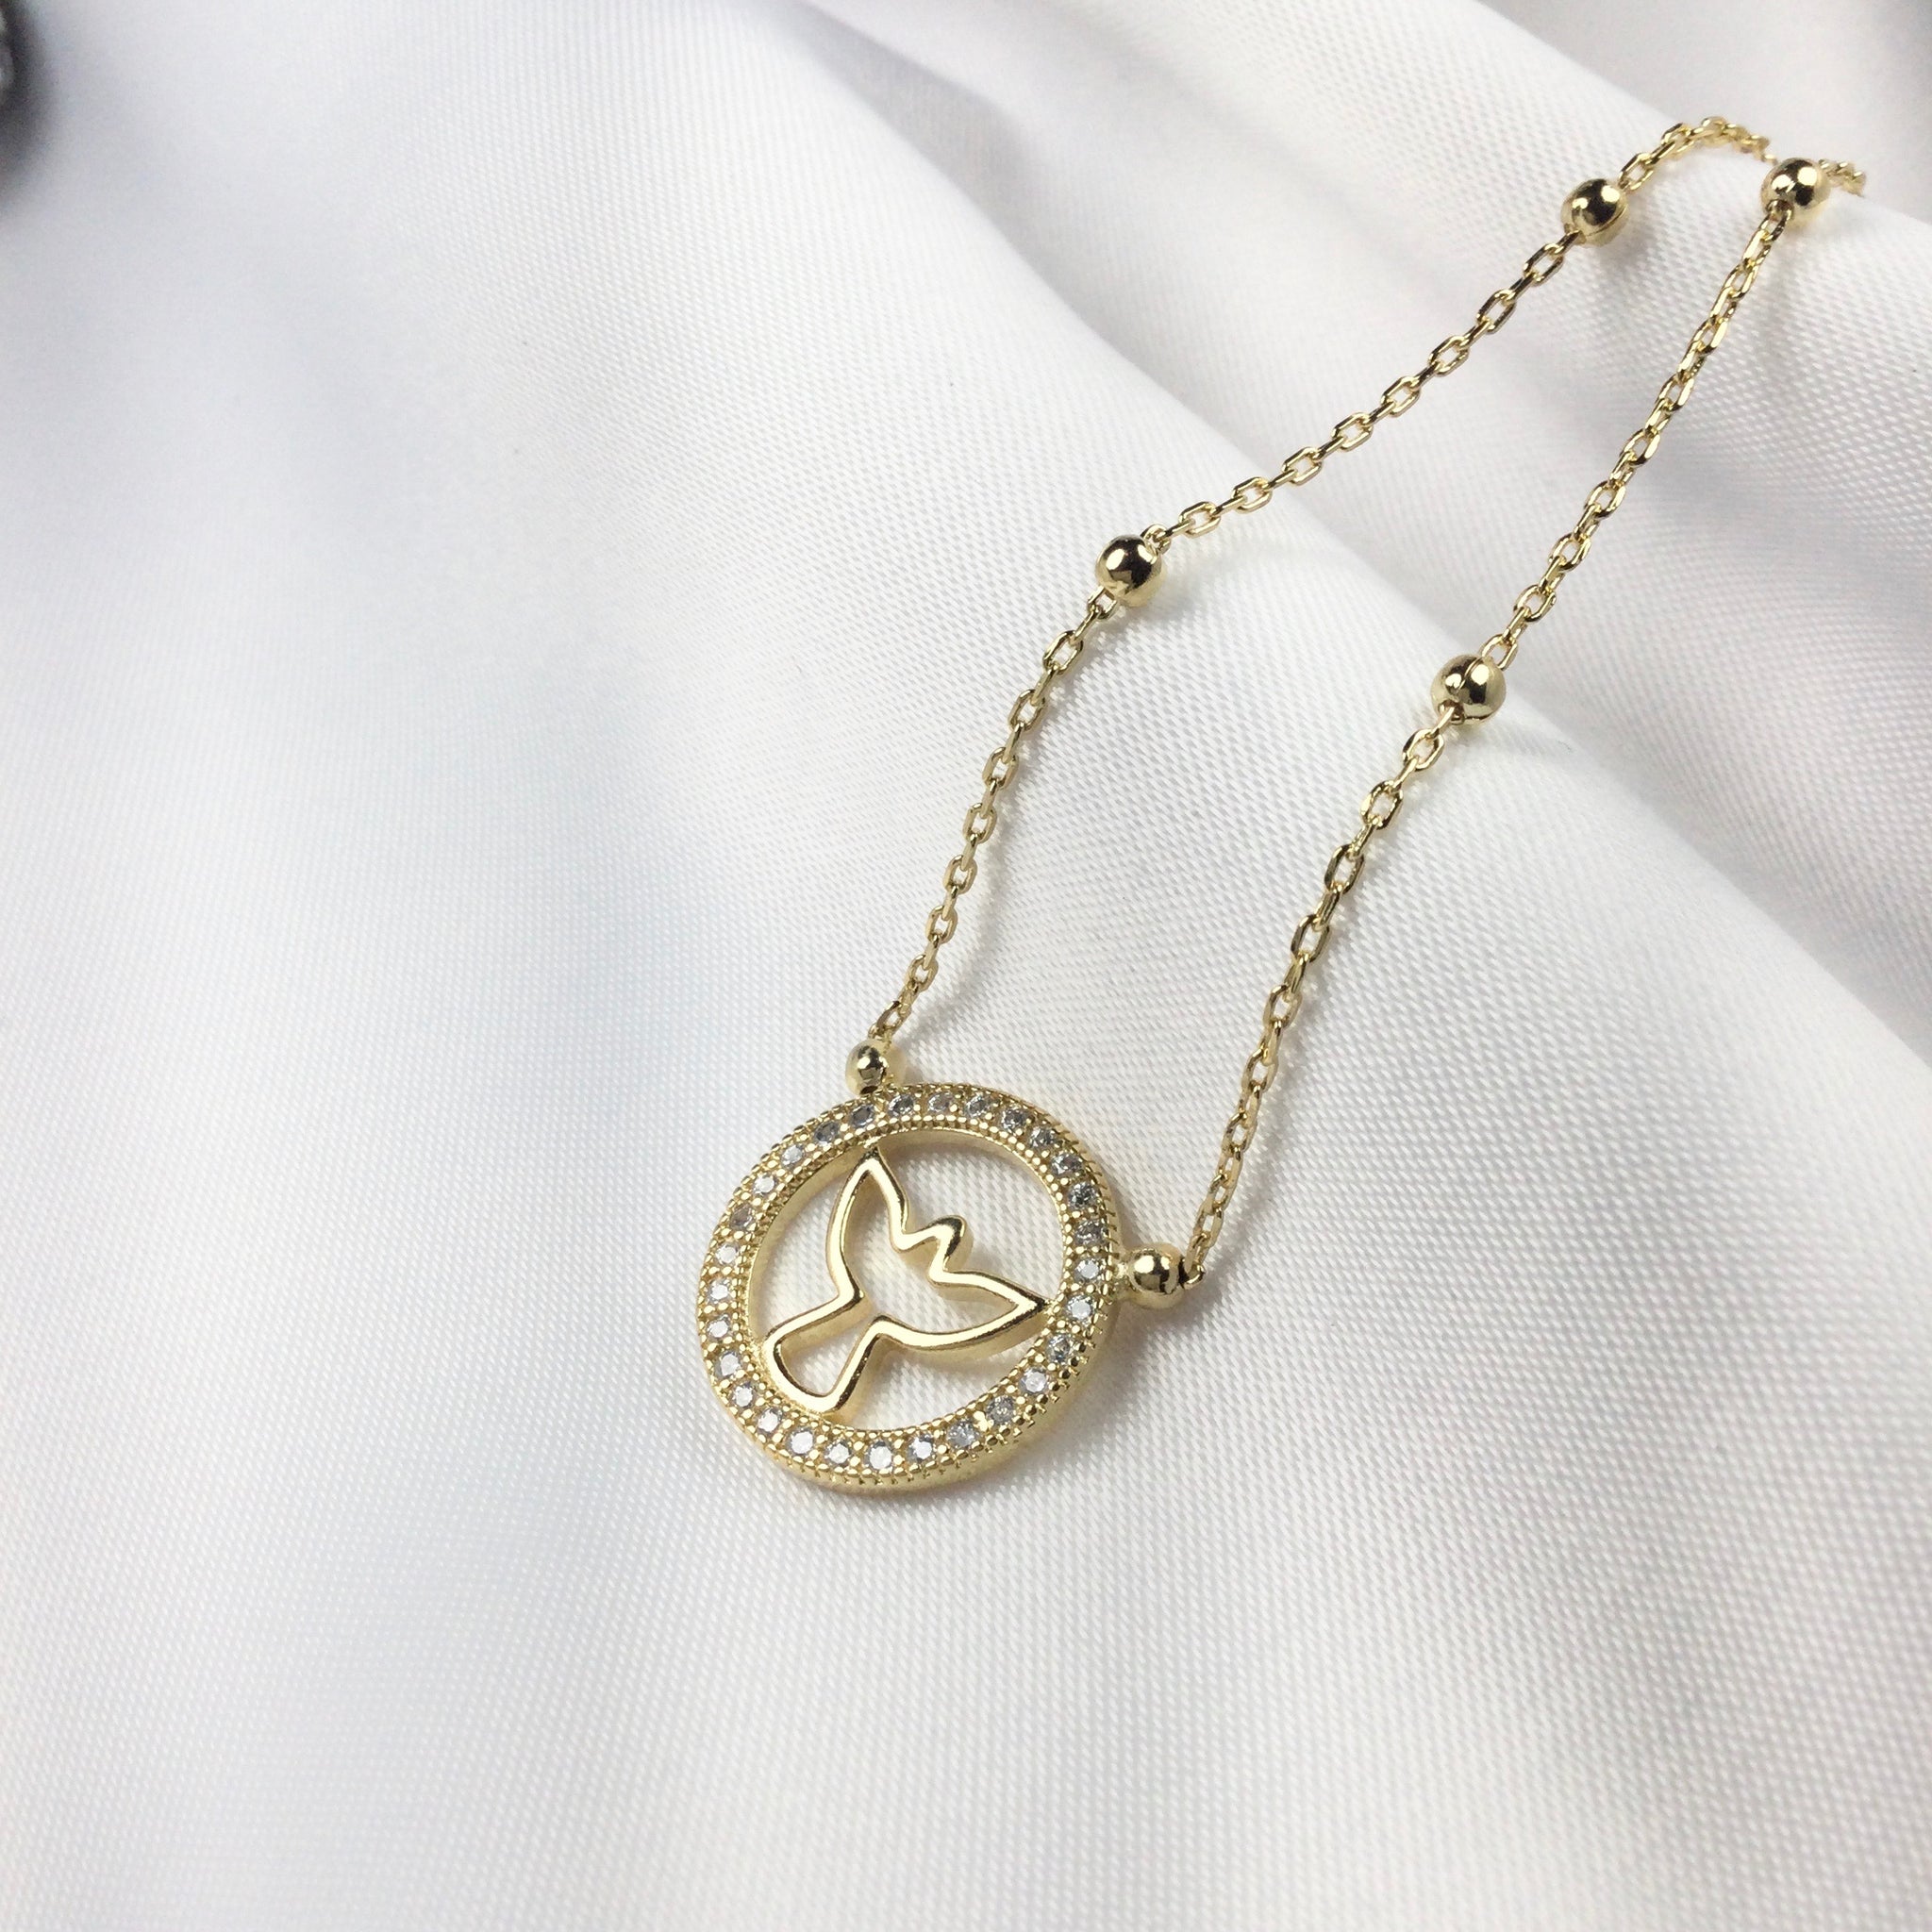 Holy Spirit Necklace and Diamondettes 18k Gold Plated